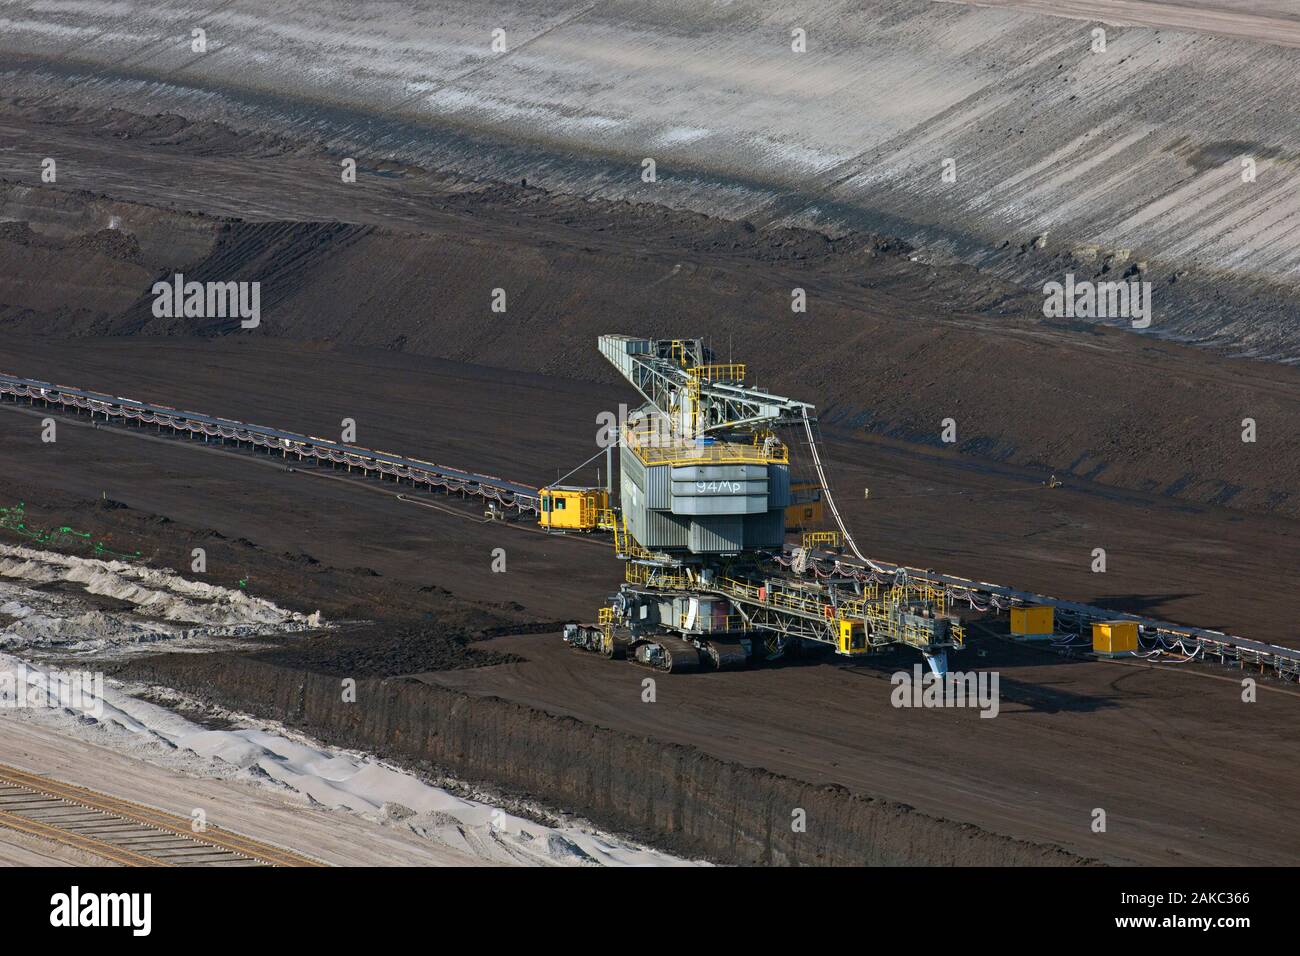 Brown coal / lignite being extracted by huge excavator at the Nochten opencast pit, lignite mine near Weisswasser, Saxony, Eastern Germany Stock Photo